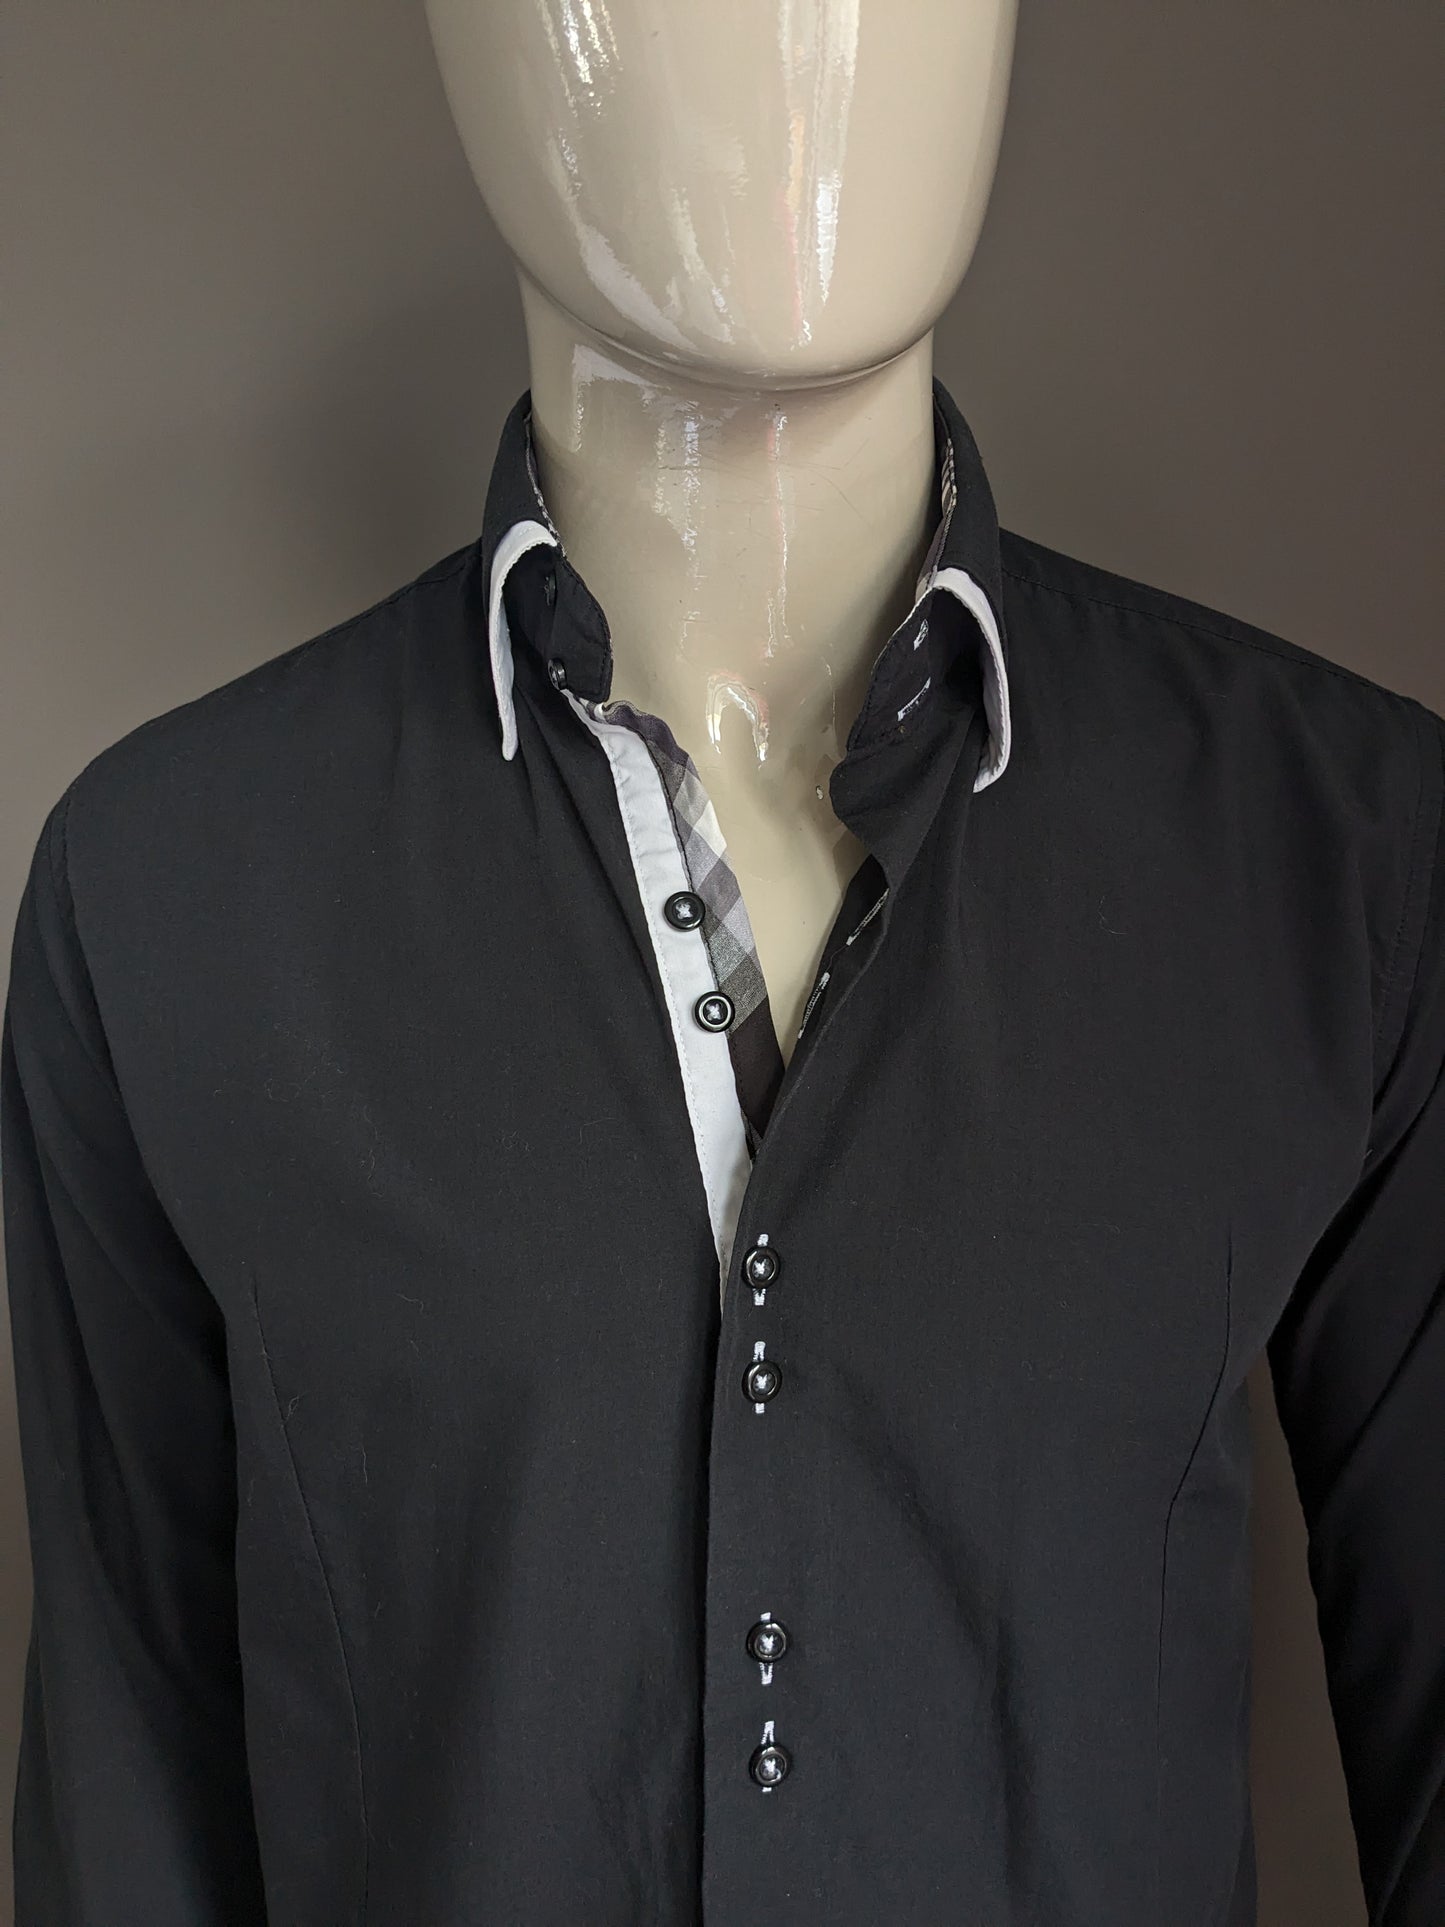 Arya Boy shirt with double collar. Black white colored. Size L.